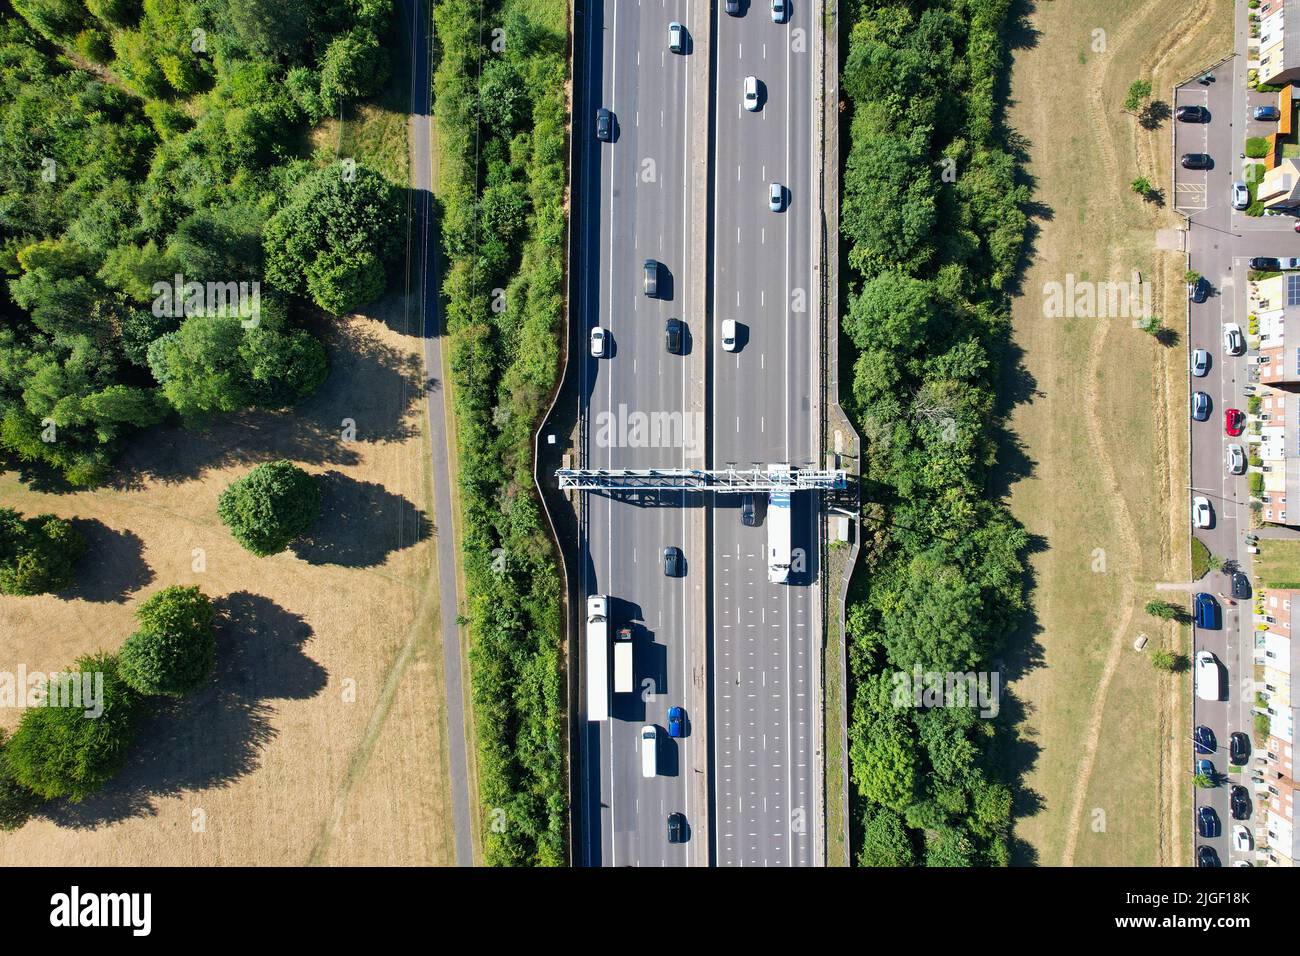 Best Aerial High Angle View of British Motorways Highways and Traffic ...